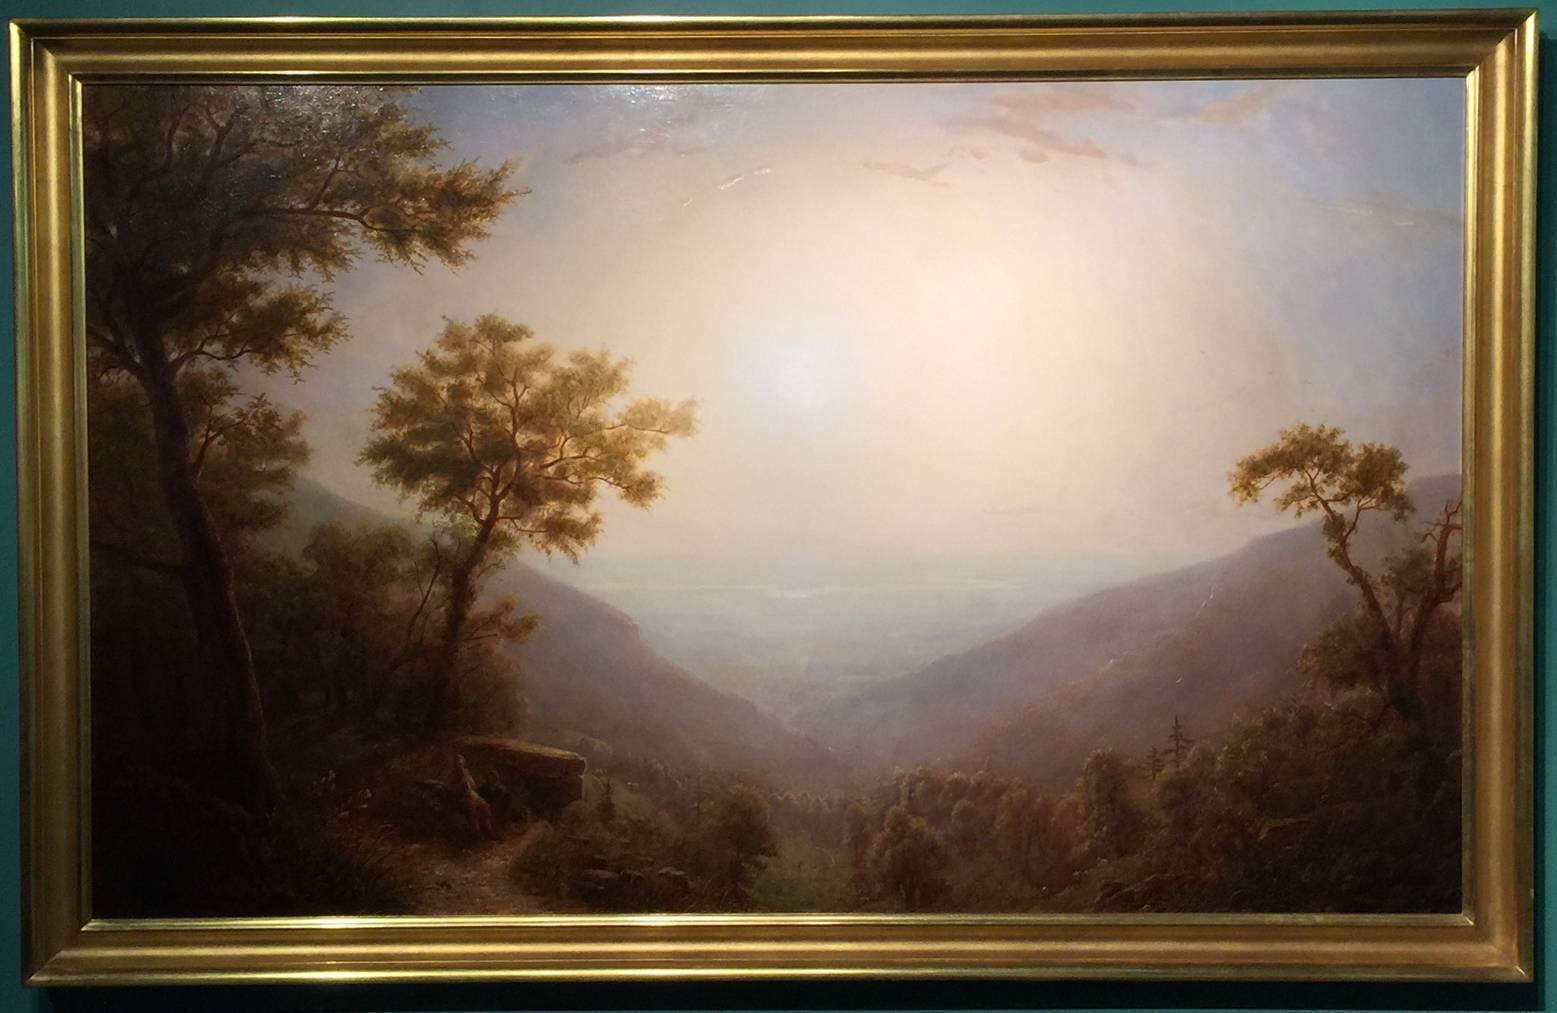 This spectacular landscape was painted by contemporary American artist Erik Koeppel (1980-). Koeppel was born in Oregon and later settled in the White Mountains of New Hampshire, where he has become well-known for his mastery of traditional